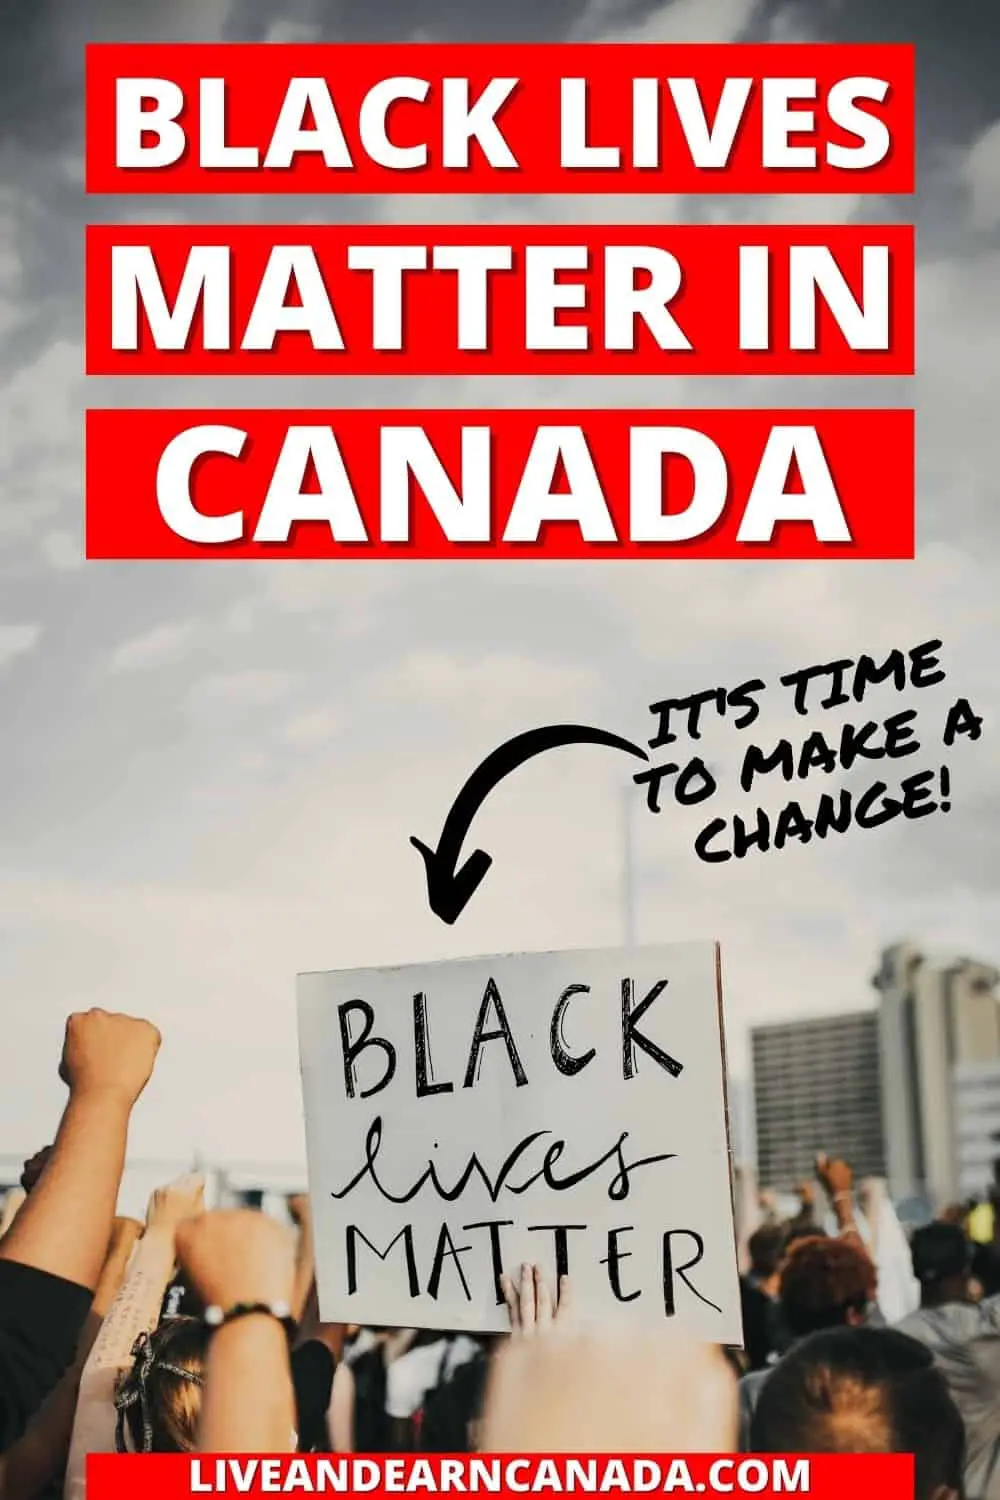 Black Lives Matter - No Justice No Peace! Black Lives Matter protests! Black History Month! Celebrate Black History and Culture in Canada. These read alouds explore Canadian black history and culture. Great for black history month or any time of the year. #blackhistorymonth #canada